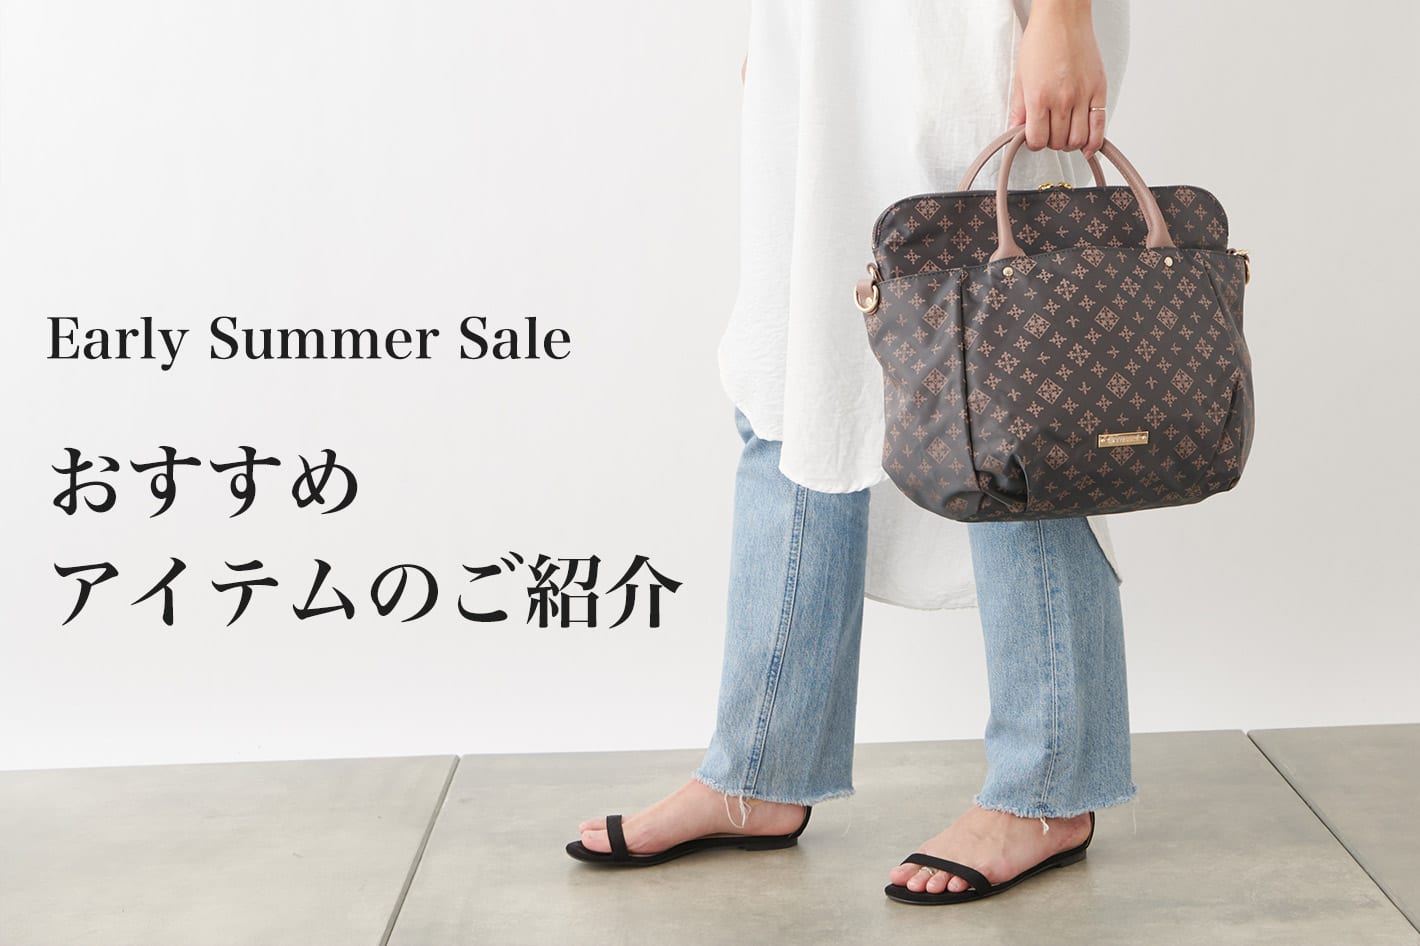 russet Early Summer SALE◆おすすめアイテム紹介します